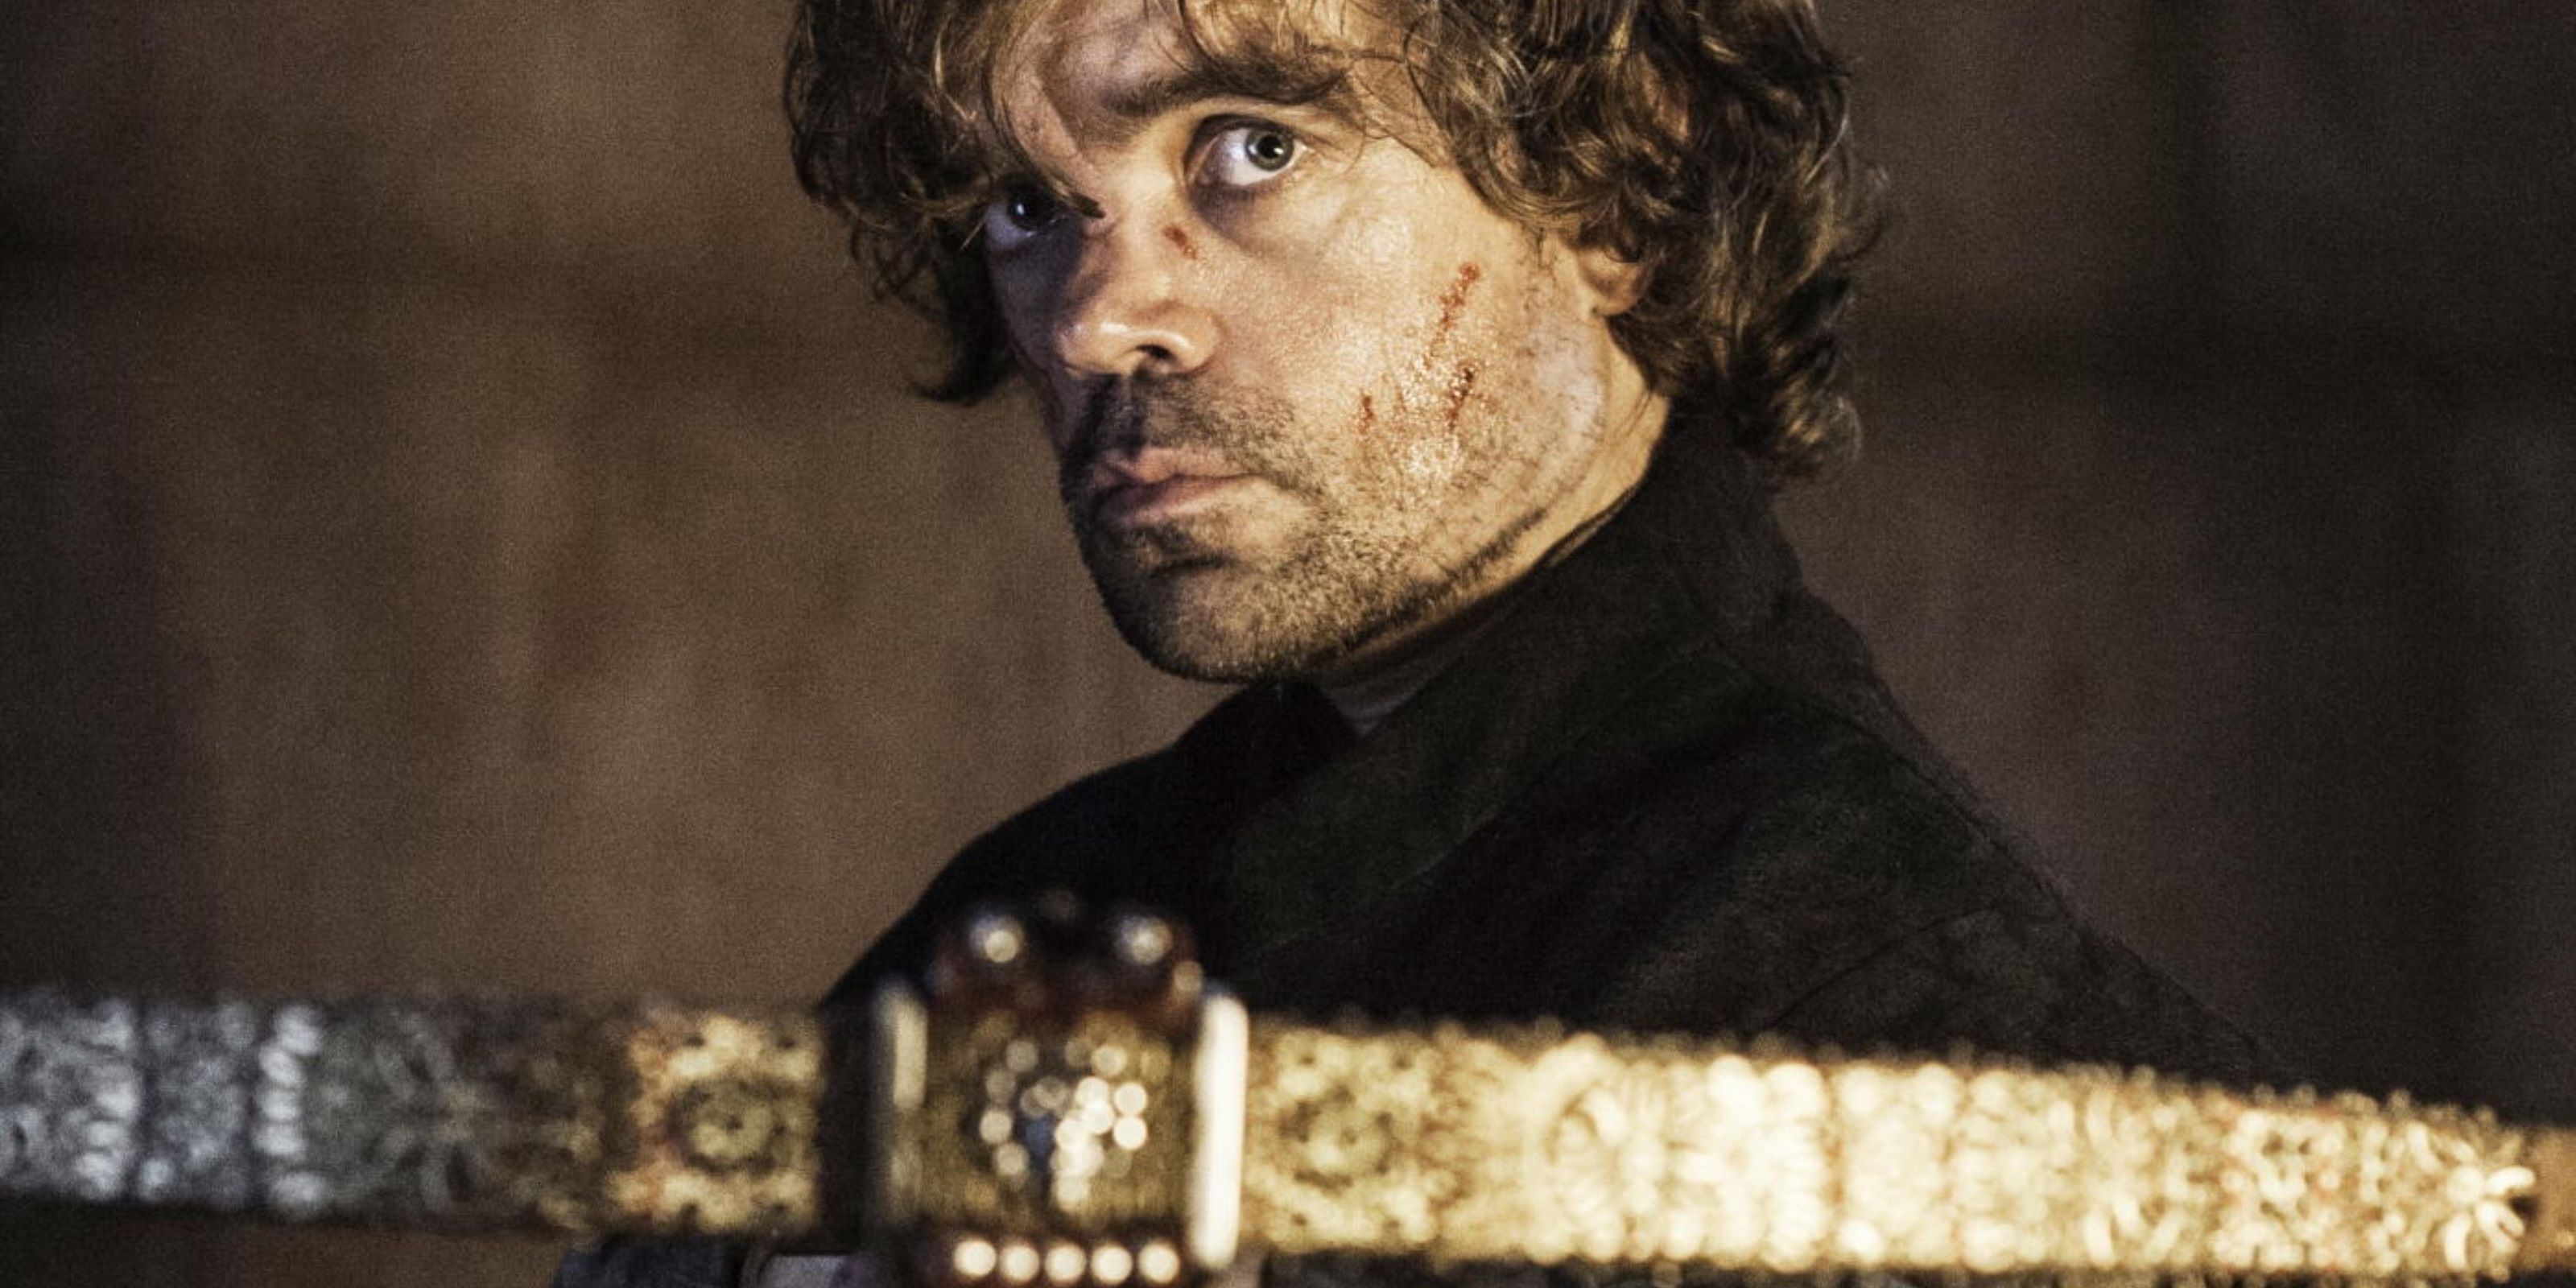 Tyrion Lannister kills Tywin with a crossbow on Game of Thrones